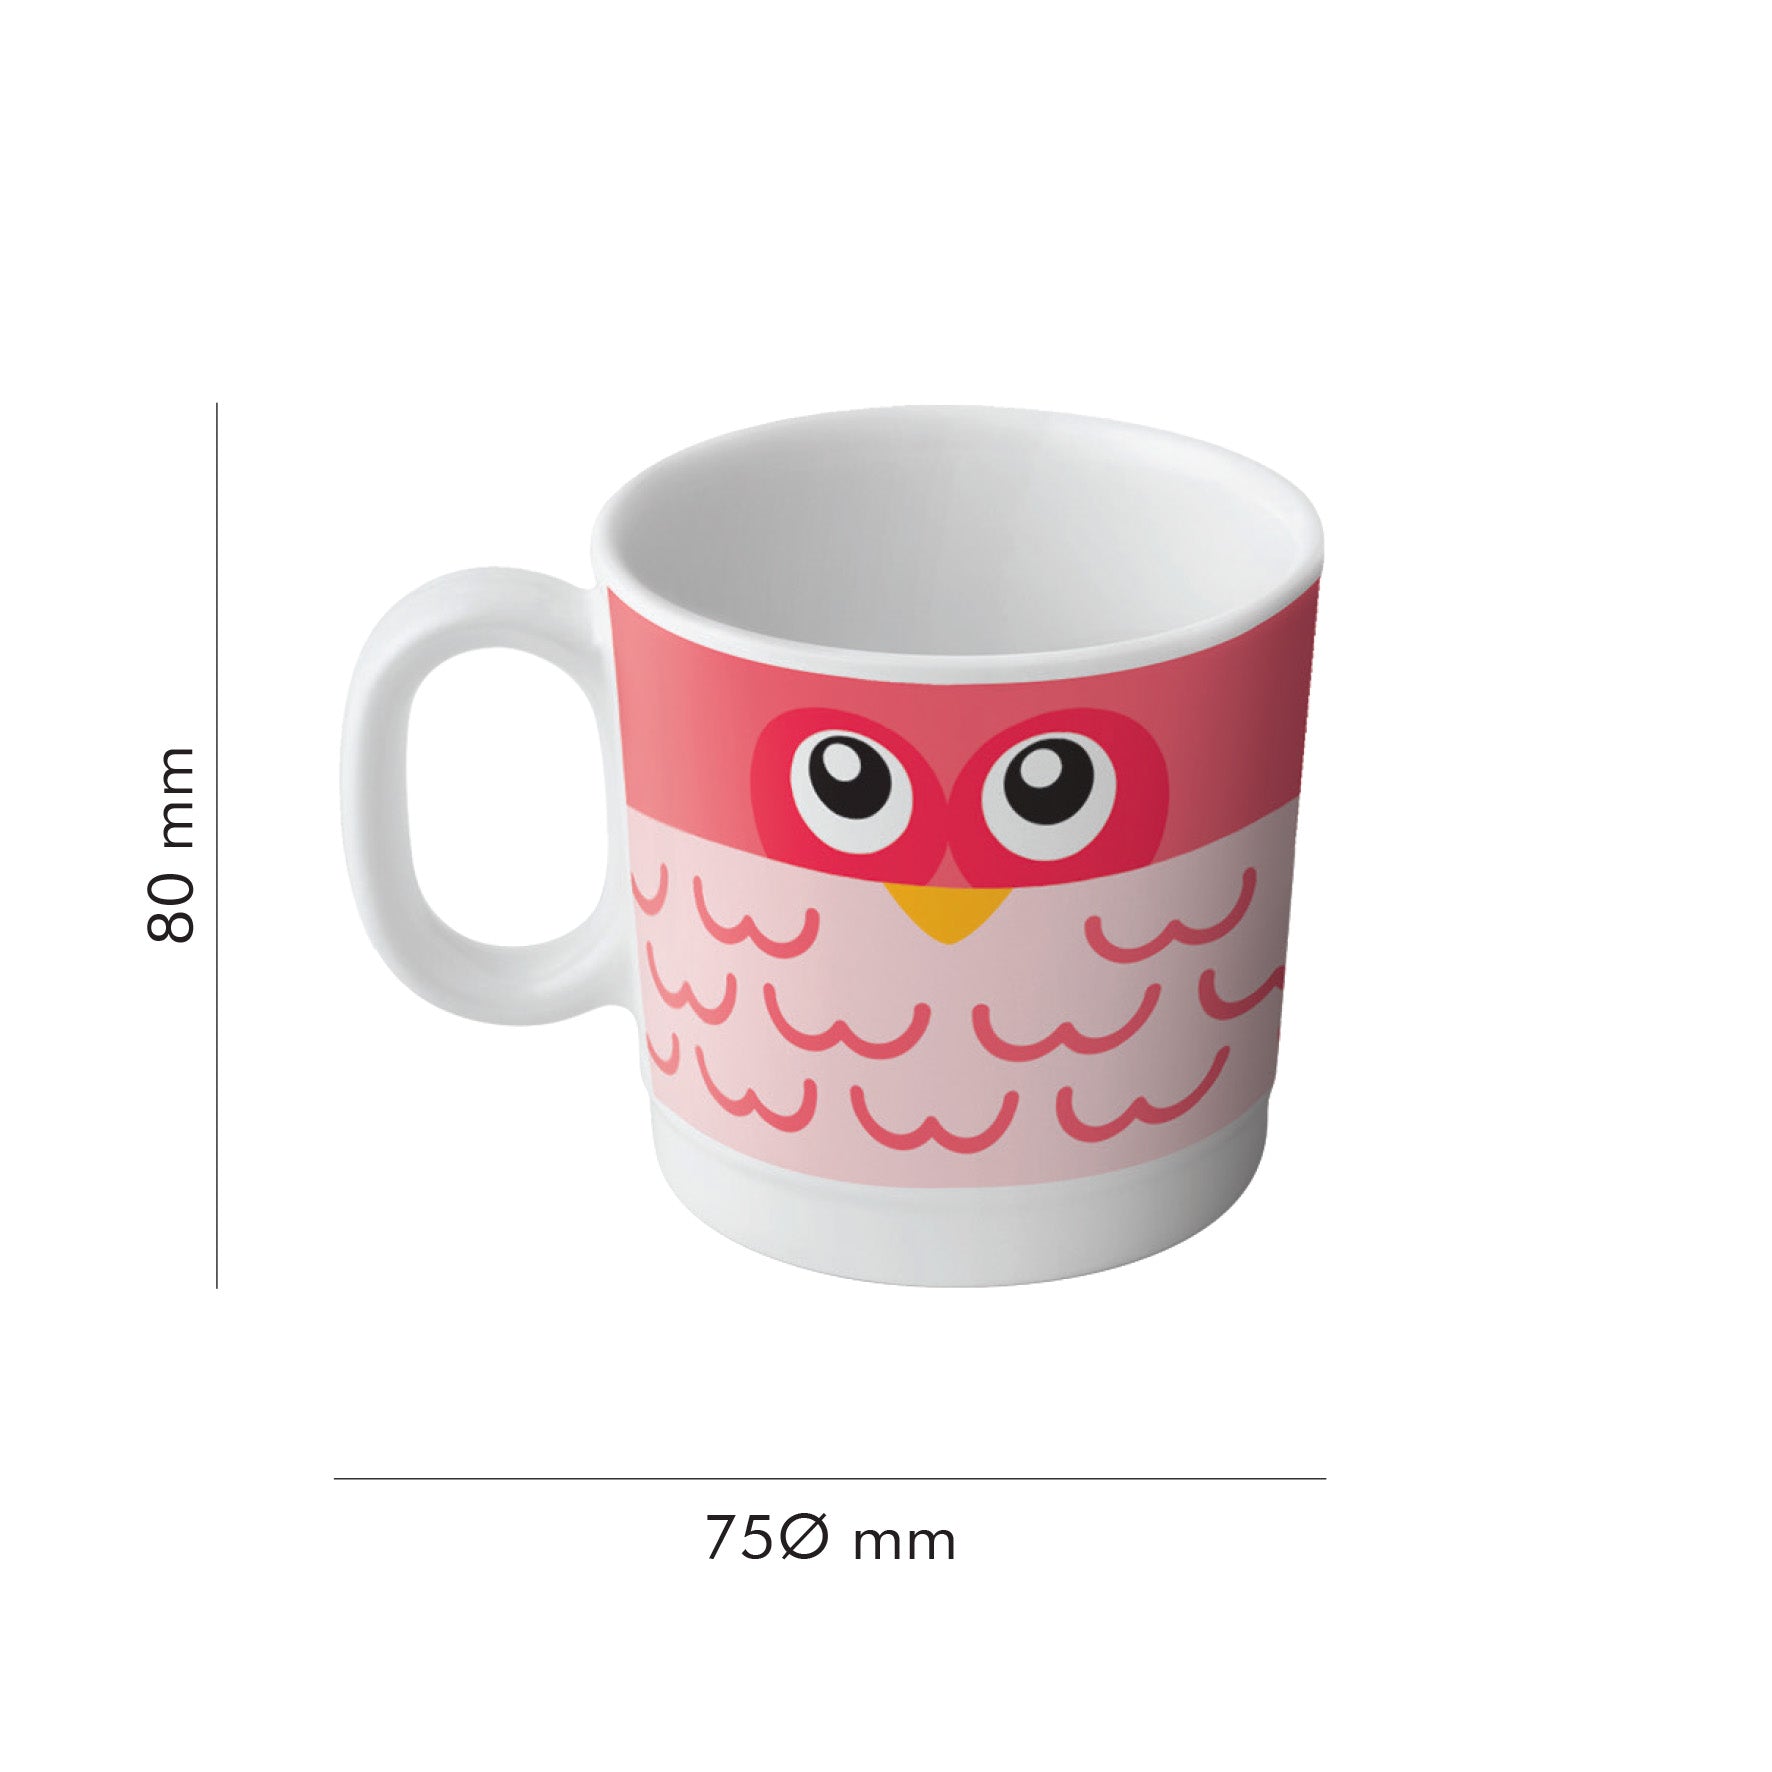 The Plate Story - Children Melamine Cup 3” - Owl (Set of 1)